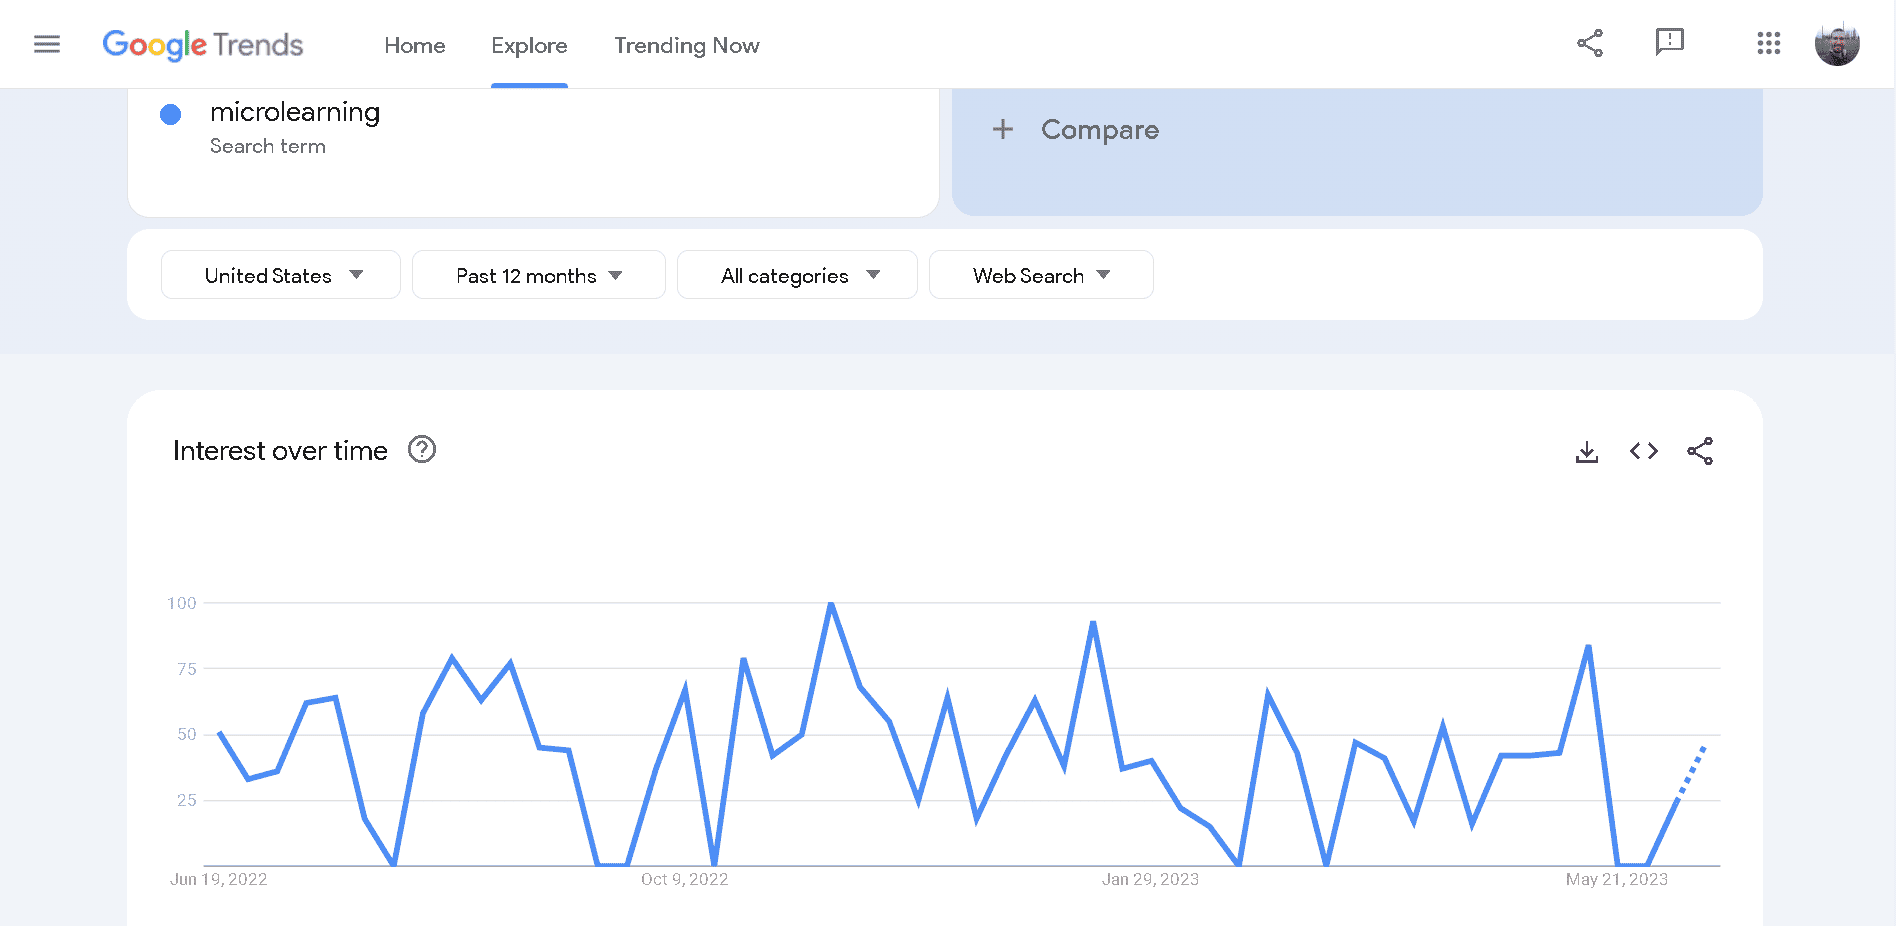 Microlearning as a topic is not trending in Google Trends